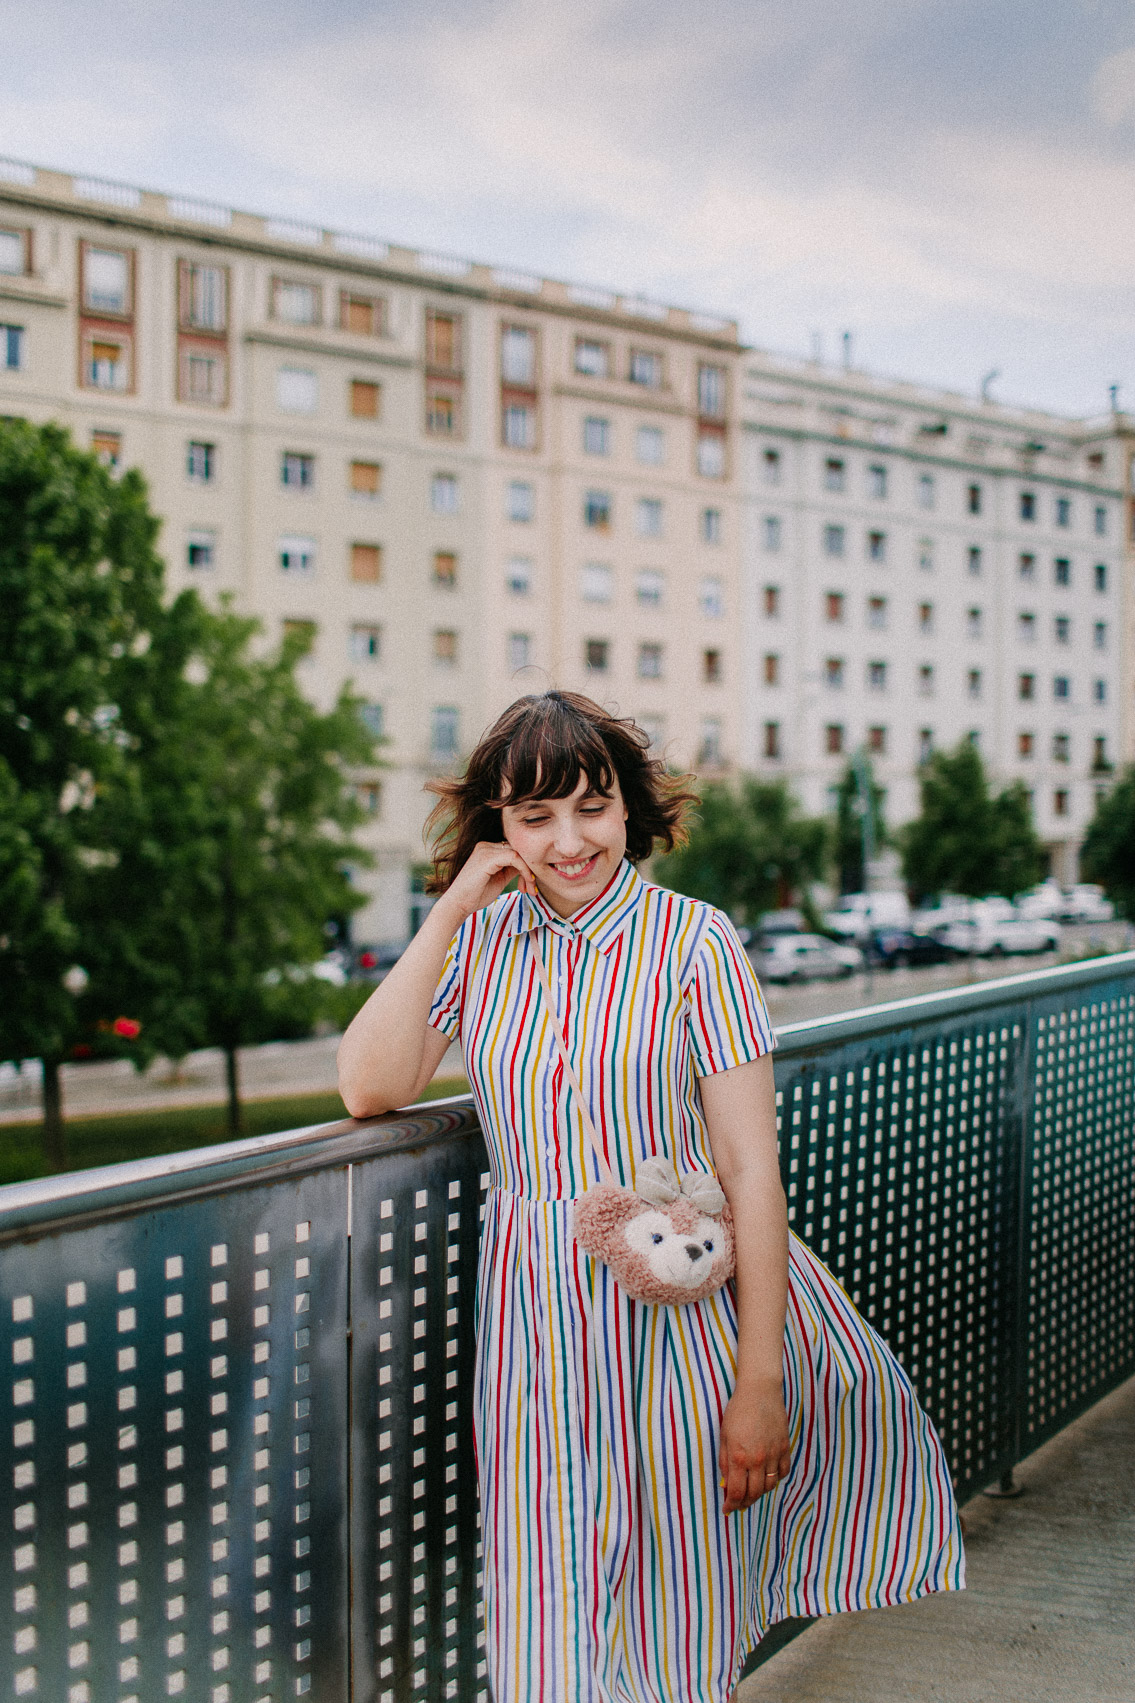 Colorful stripes dress outfit - The cat, you and us